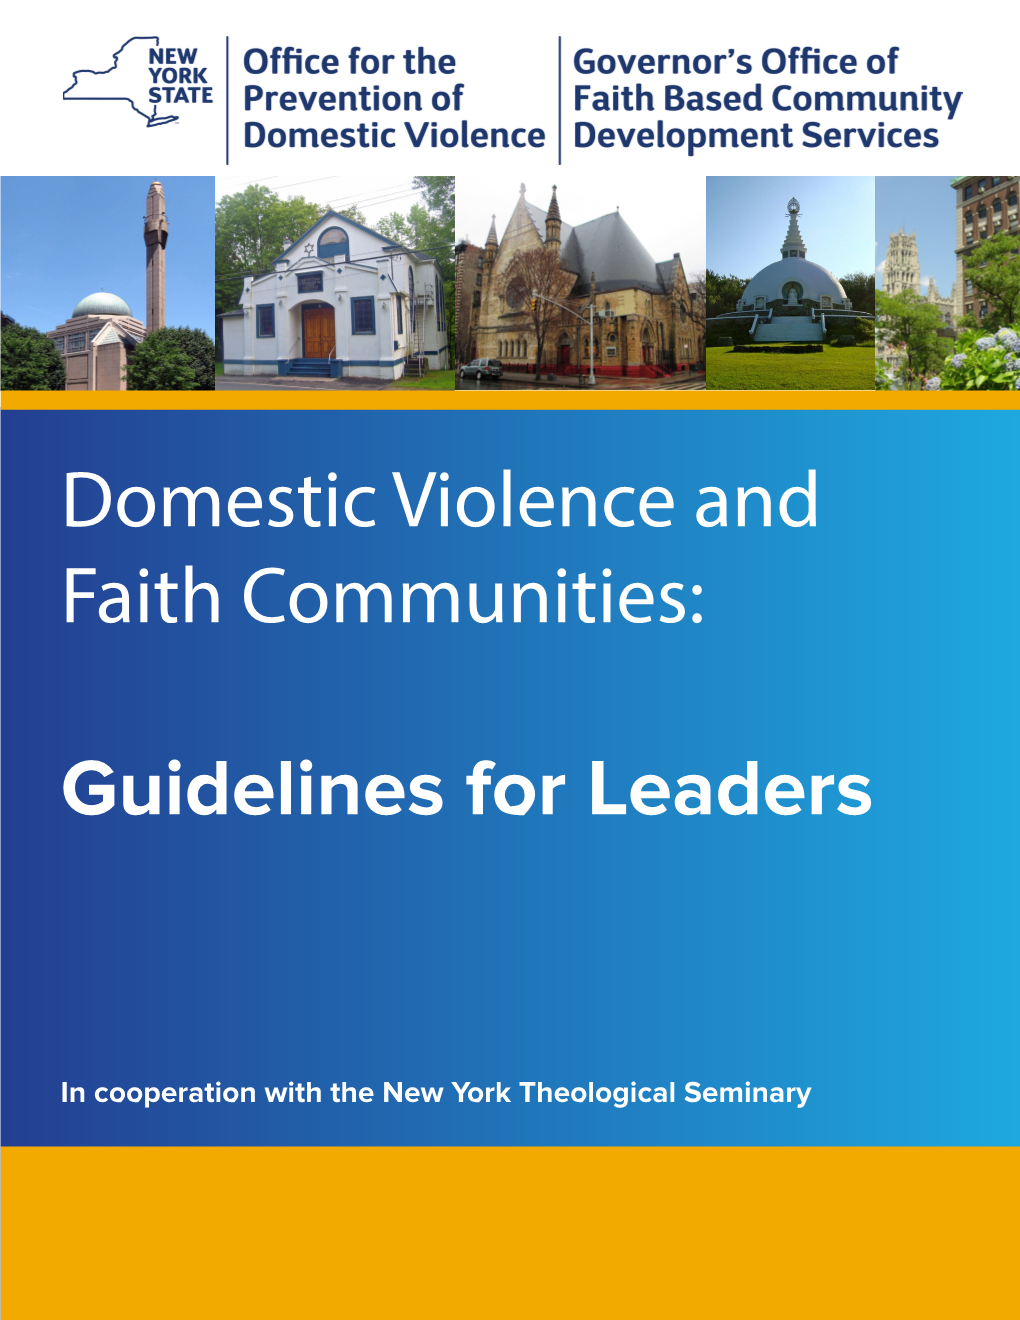 Domestic Violence and Faith Communities: Guidelines for Leaders